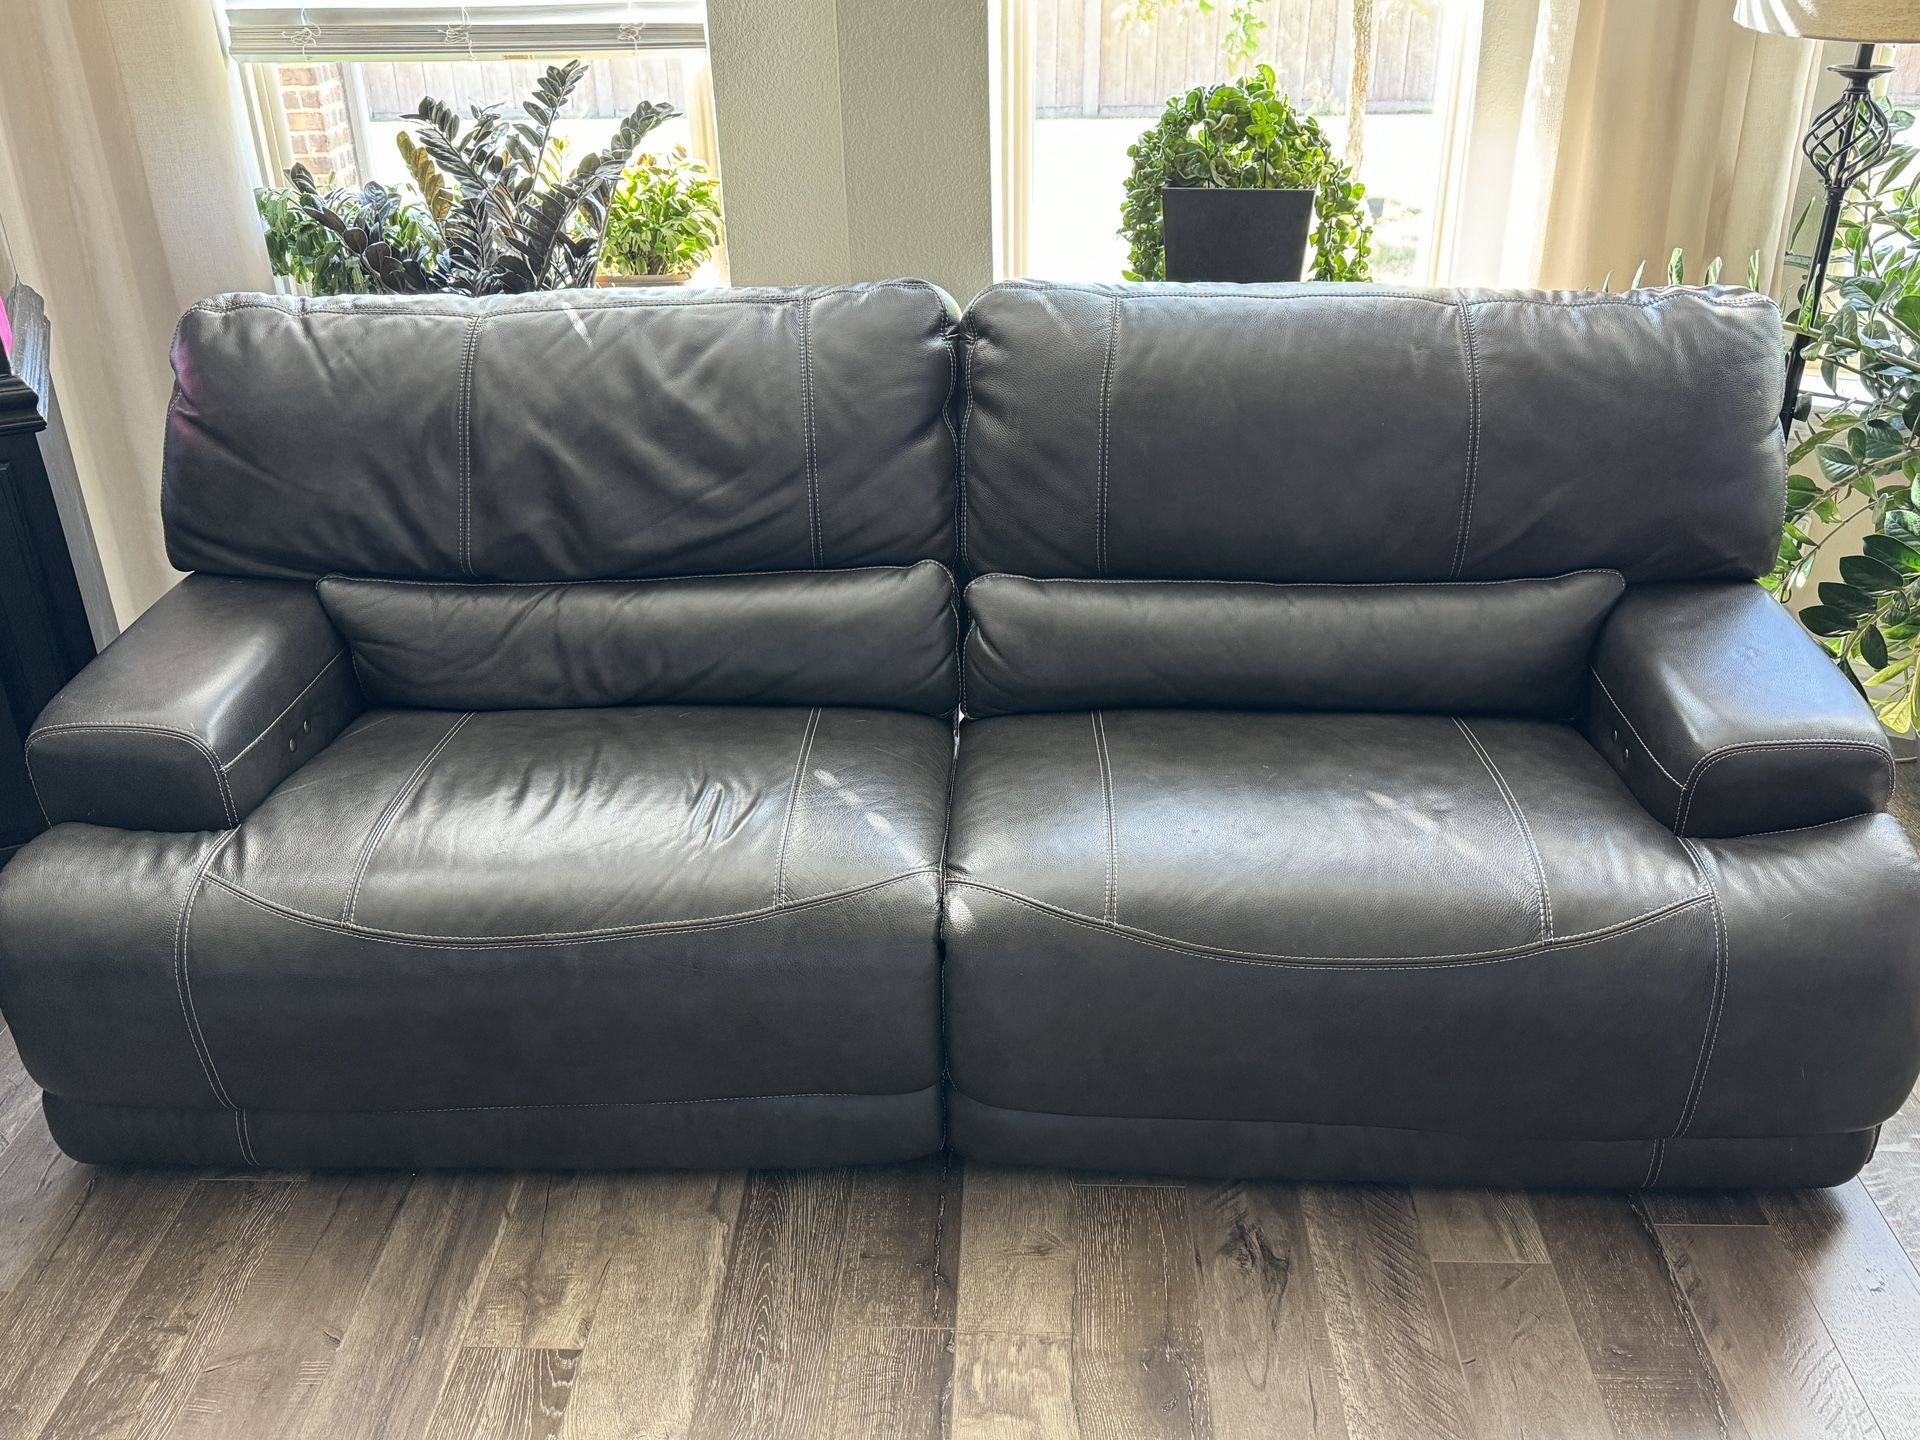 2 Couches For Sell